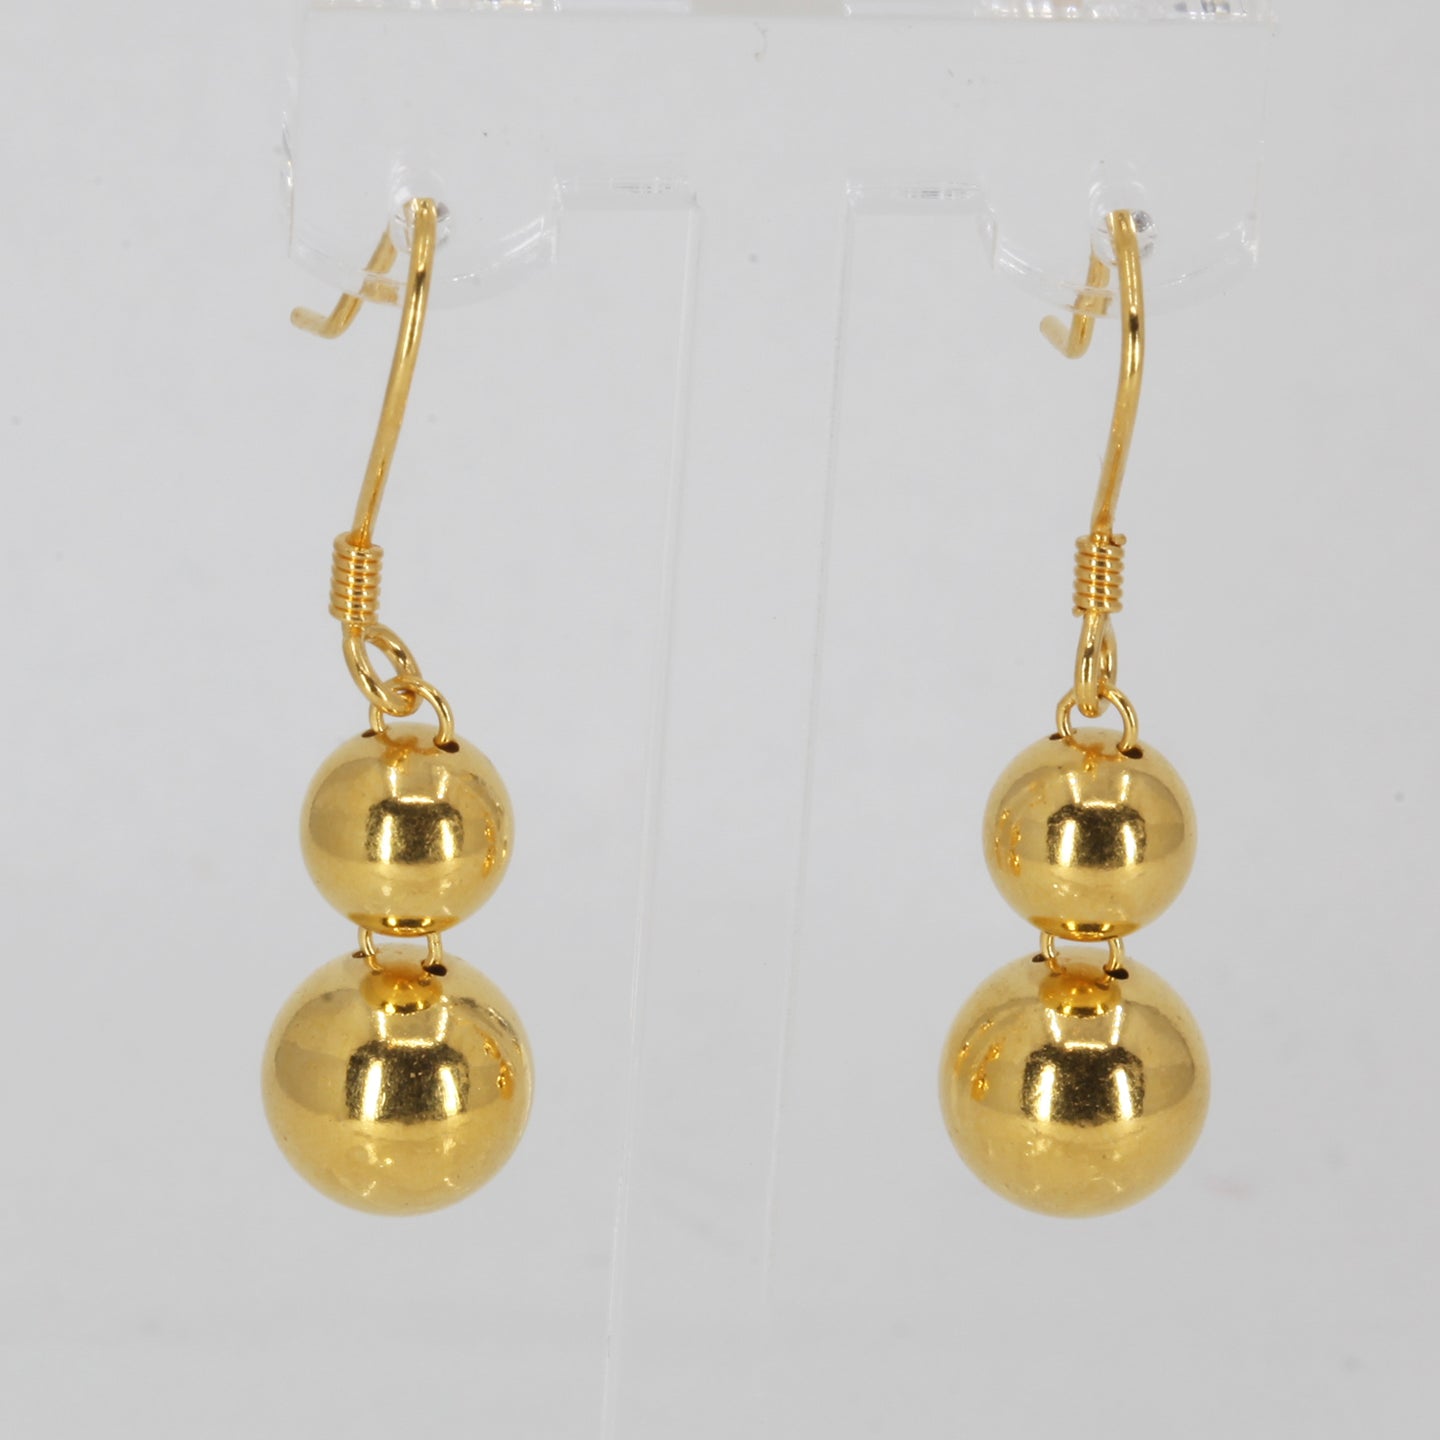 24K Solid Yellow Gold Double Sphere Hanging Earrings 7.1 Grams